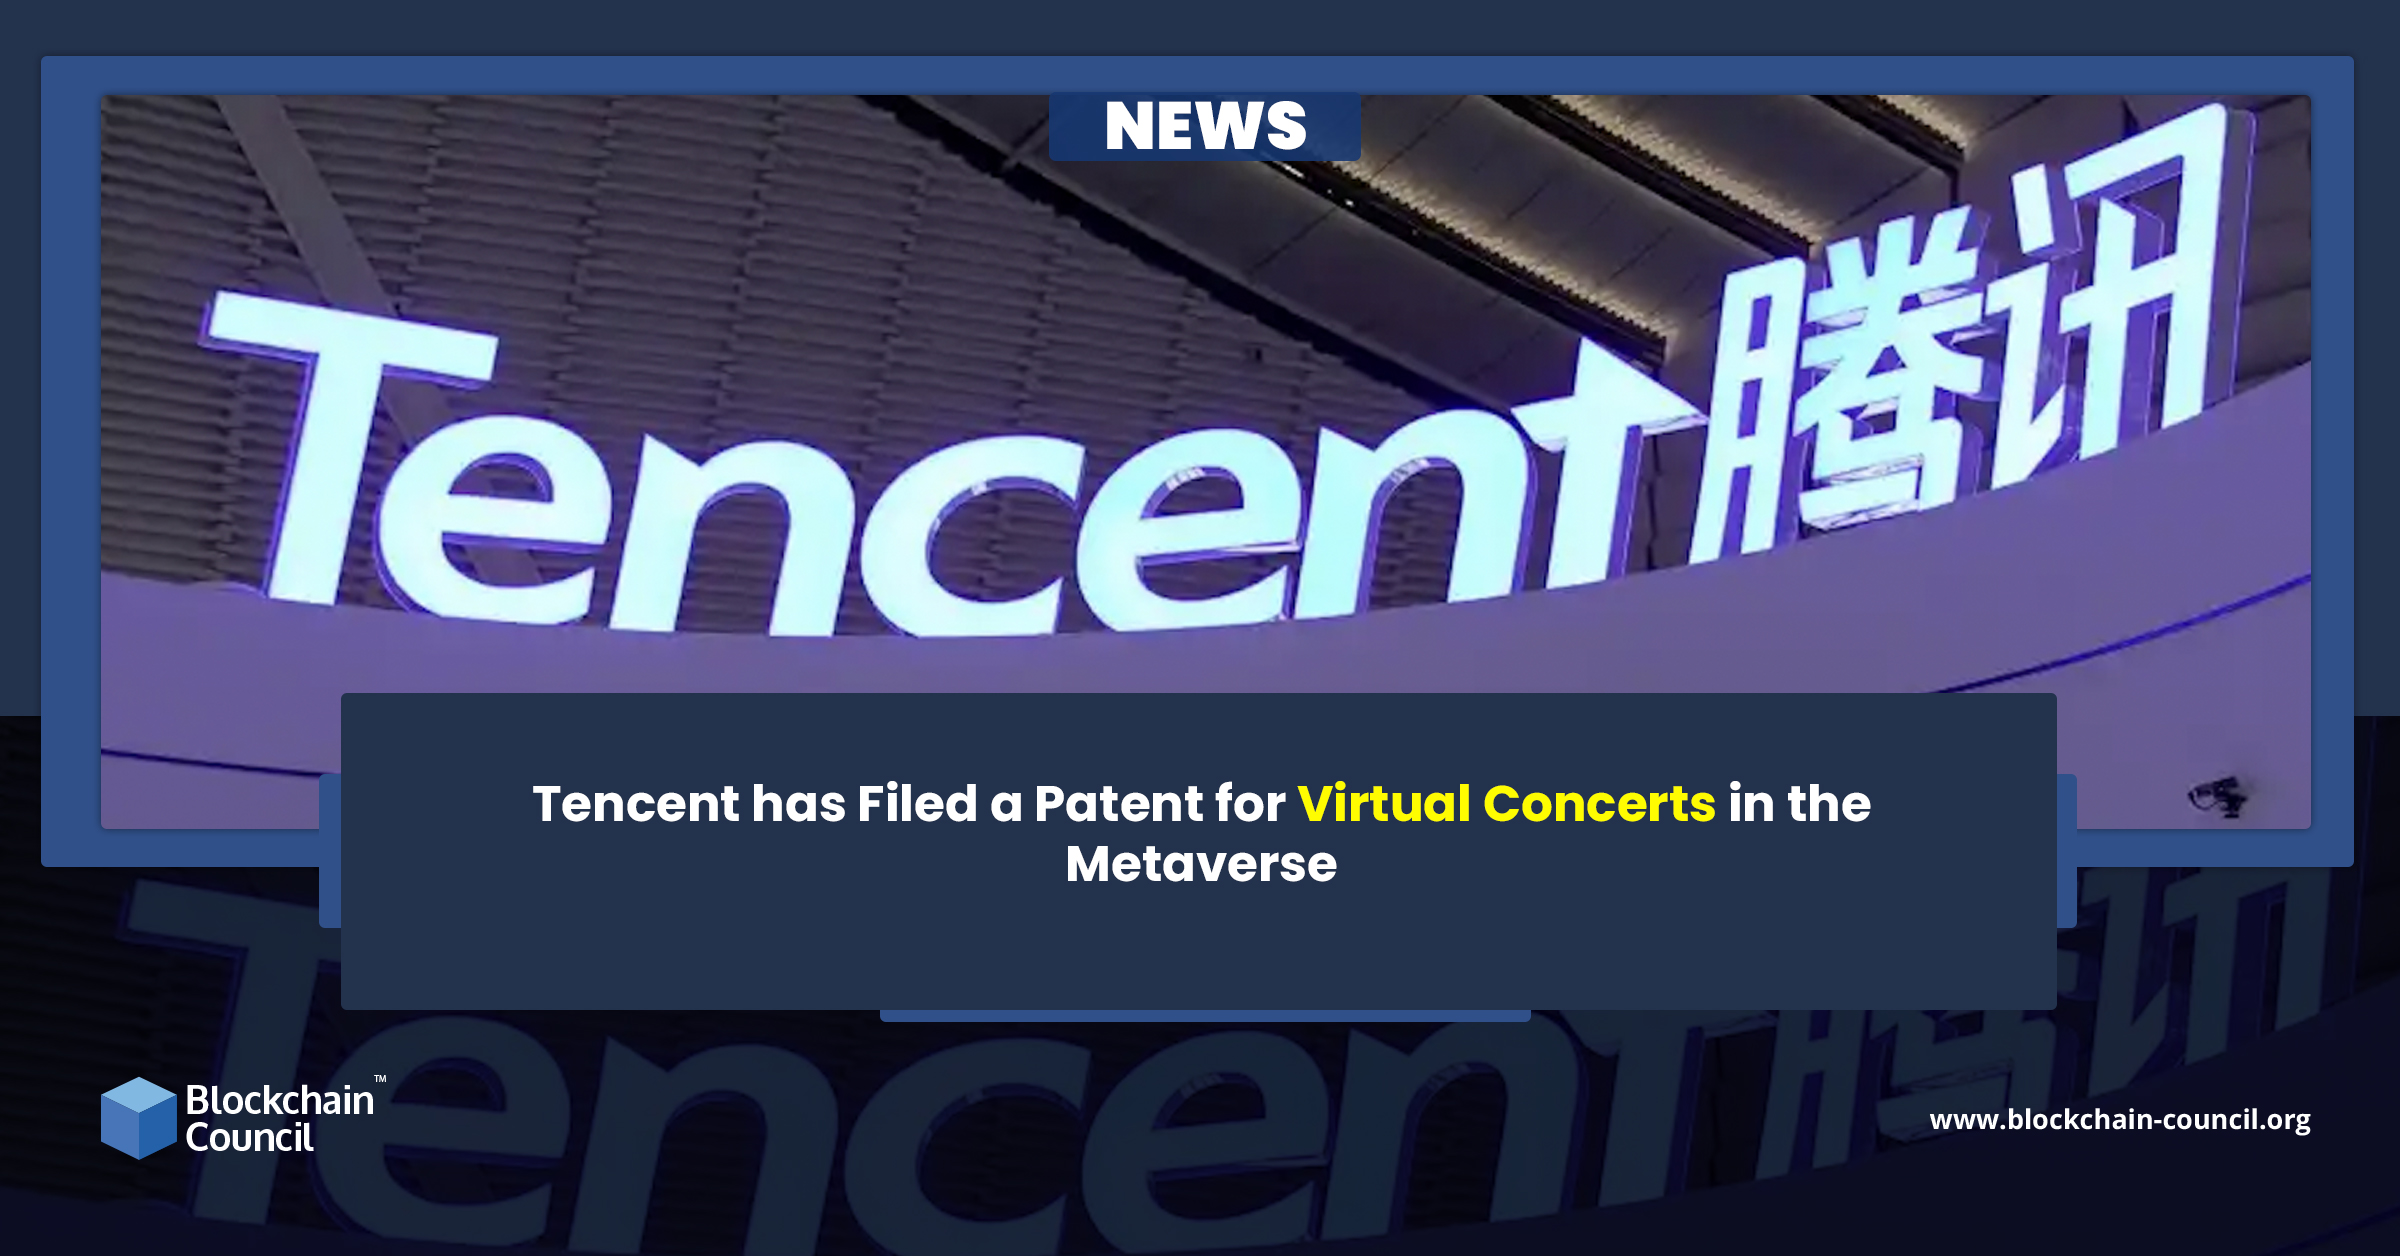 Tencent has Filed a Patent for Virtual Concerts in the Metaverse